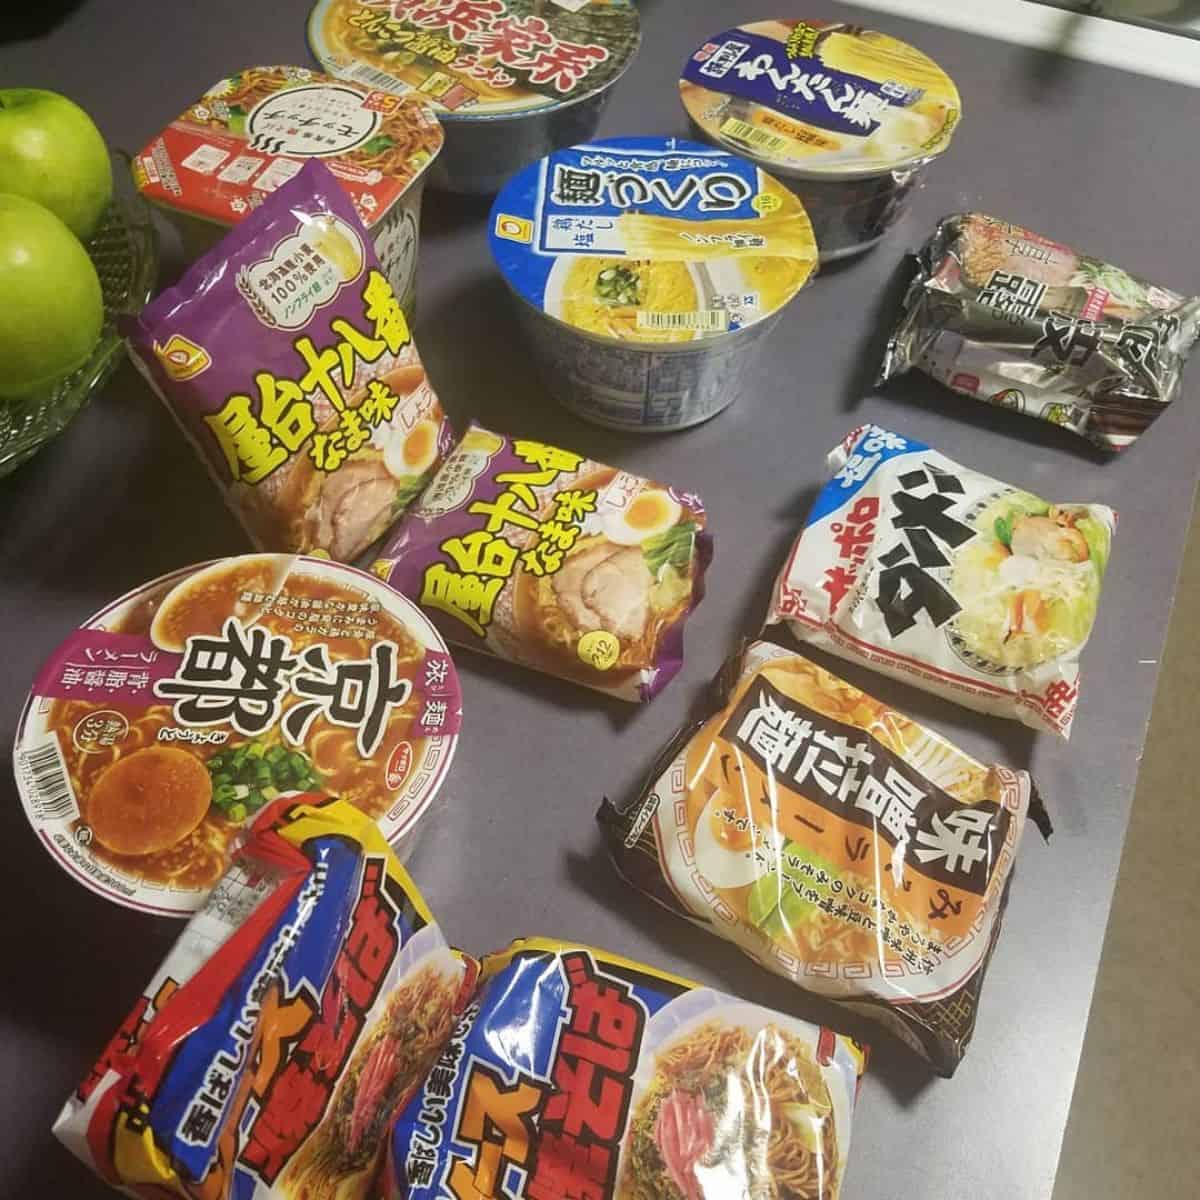 Package full of noodles